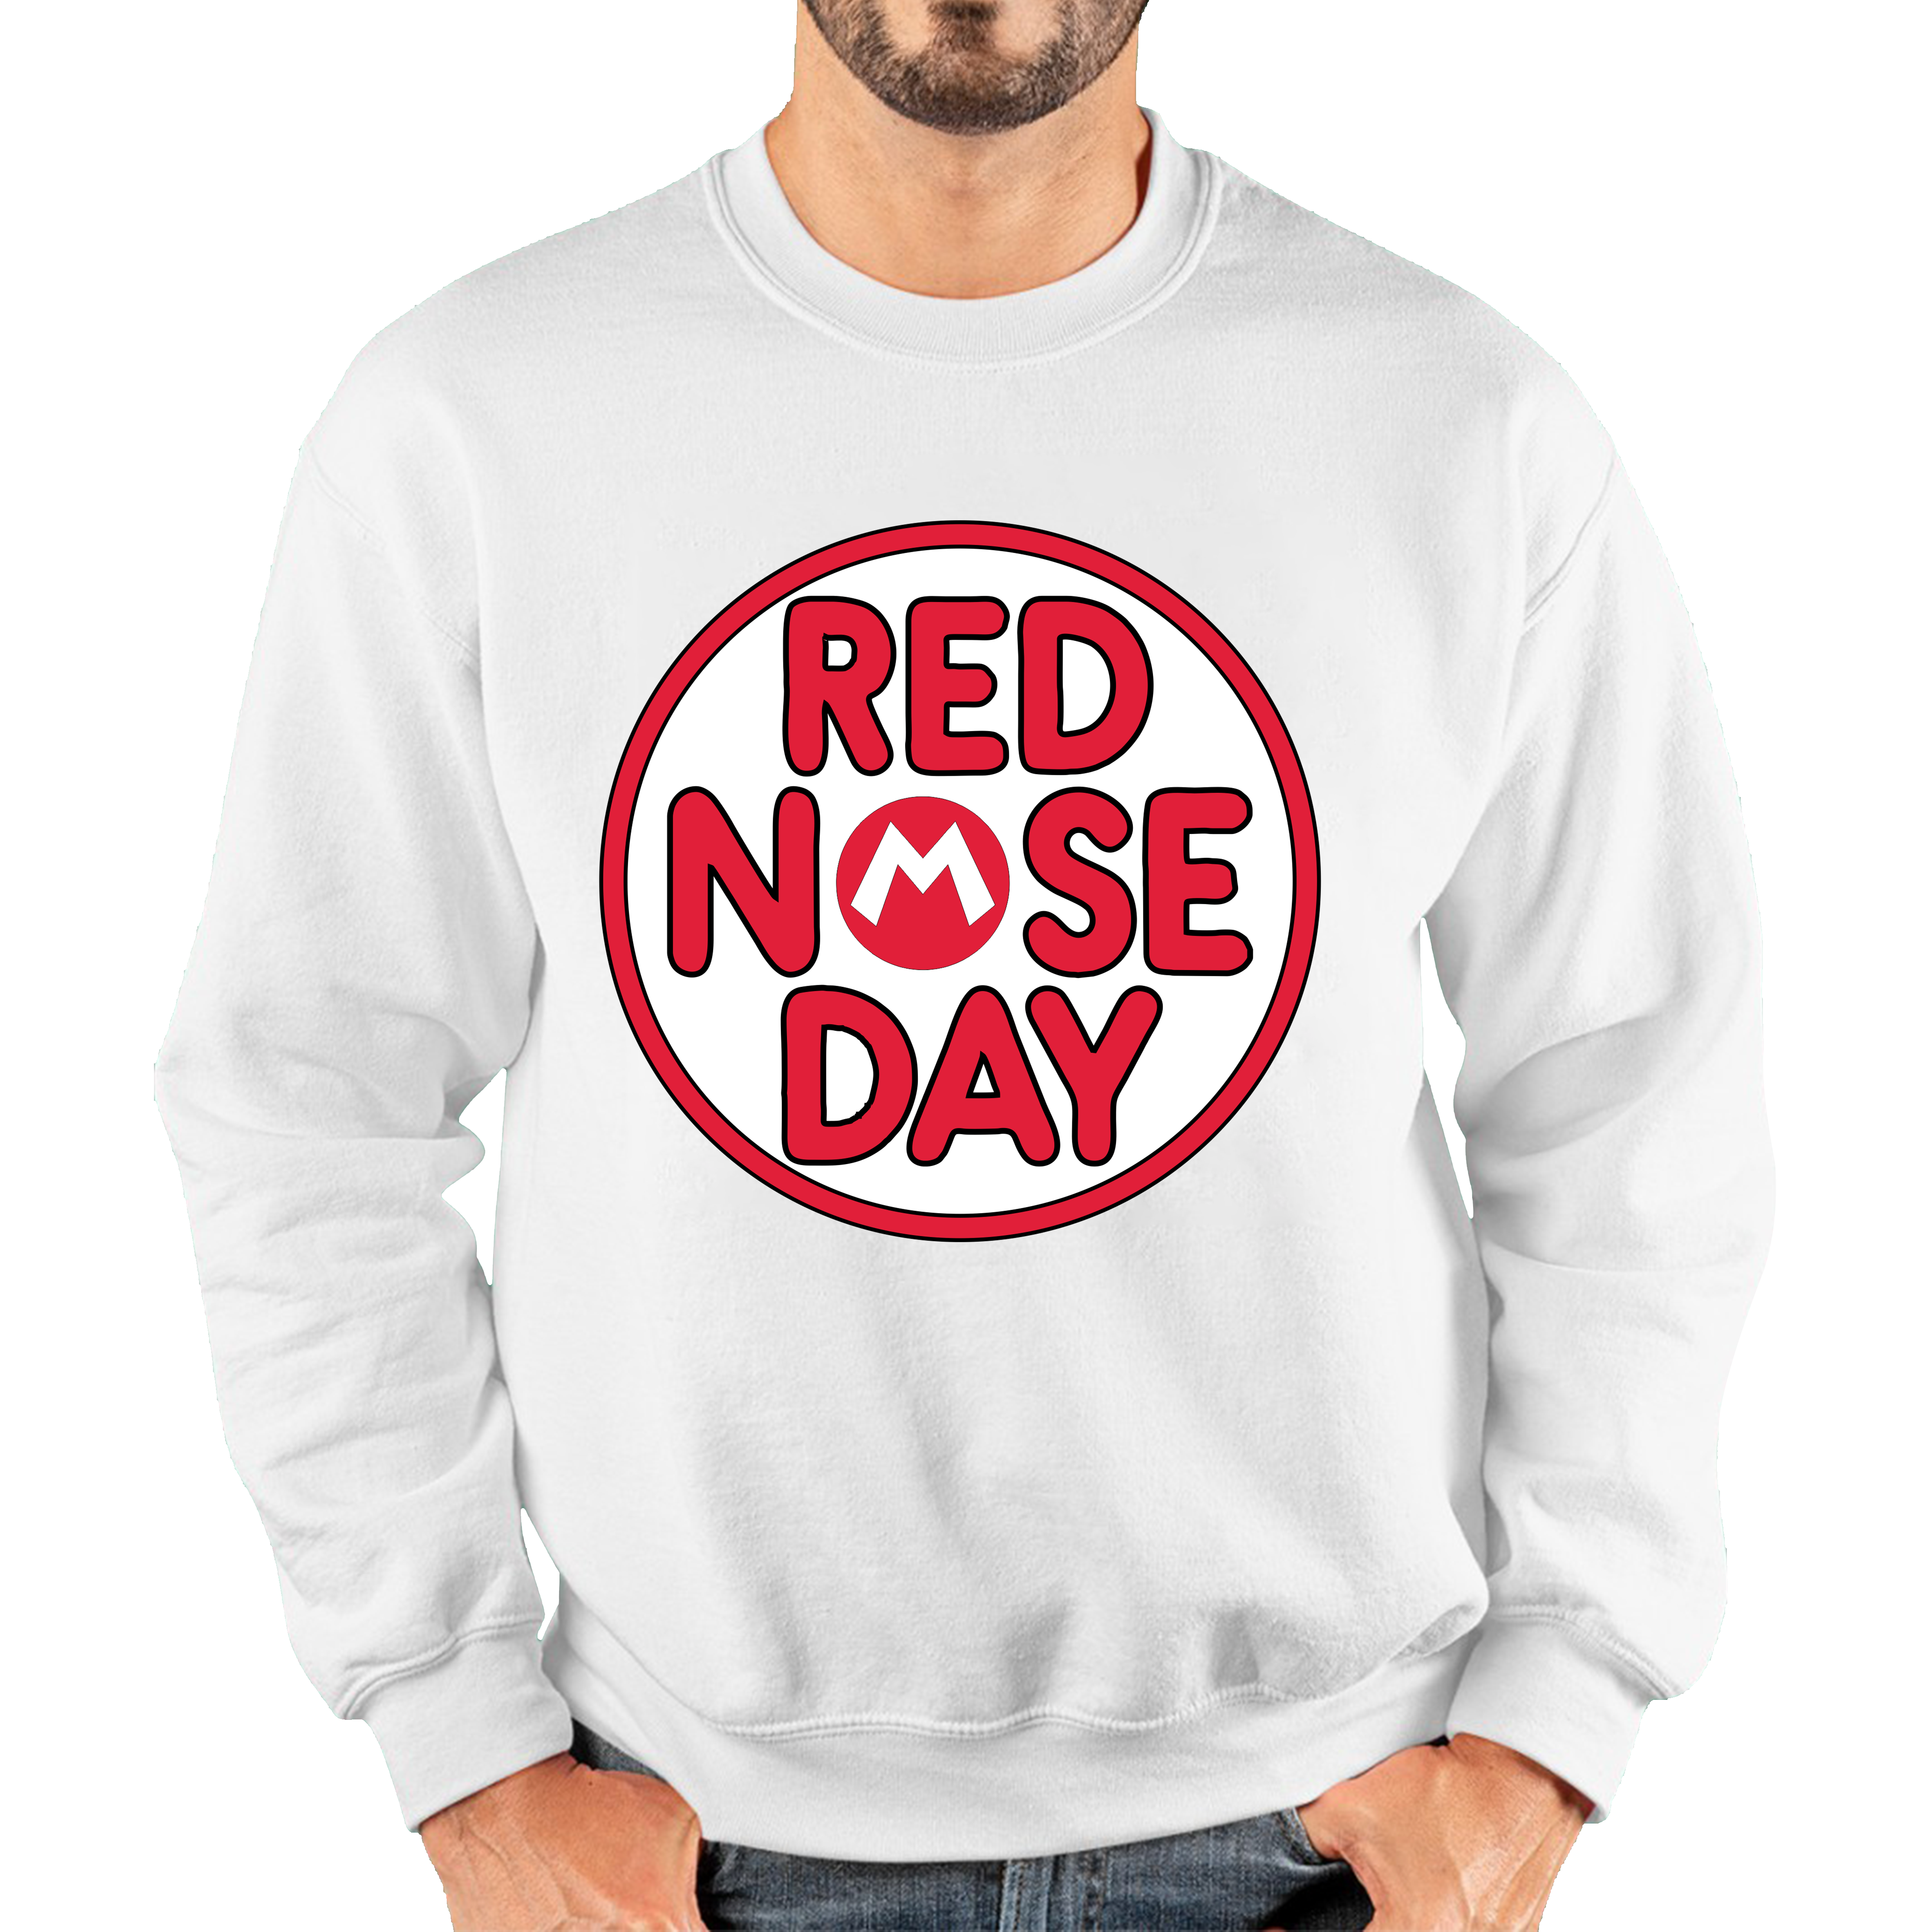 Super Mario Red Nose Day Adult Sweatshirt. 50% Goes To Charity